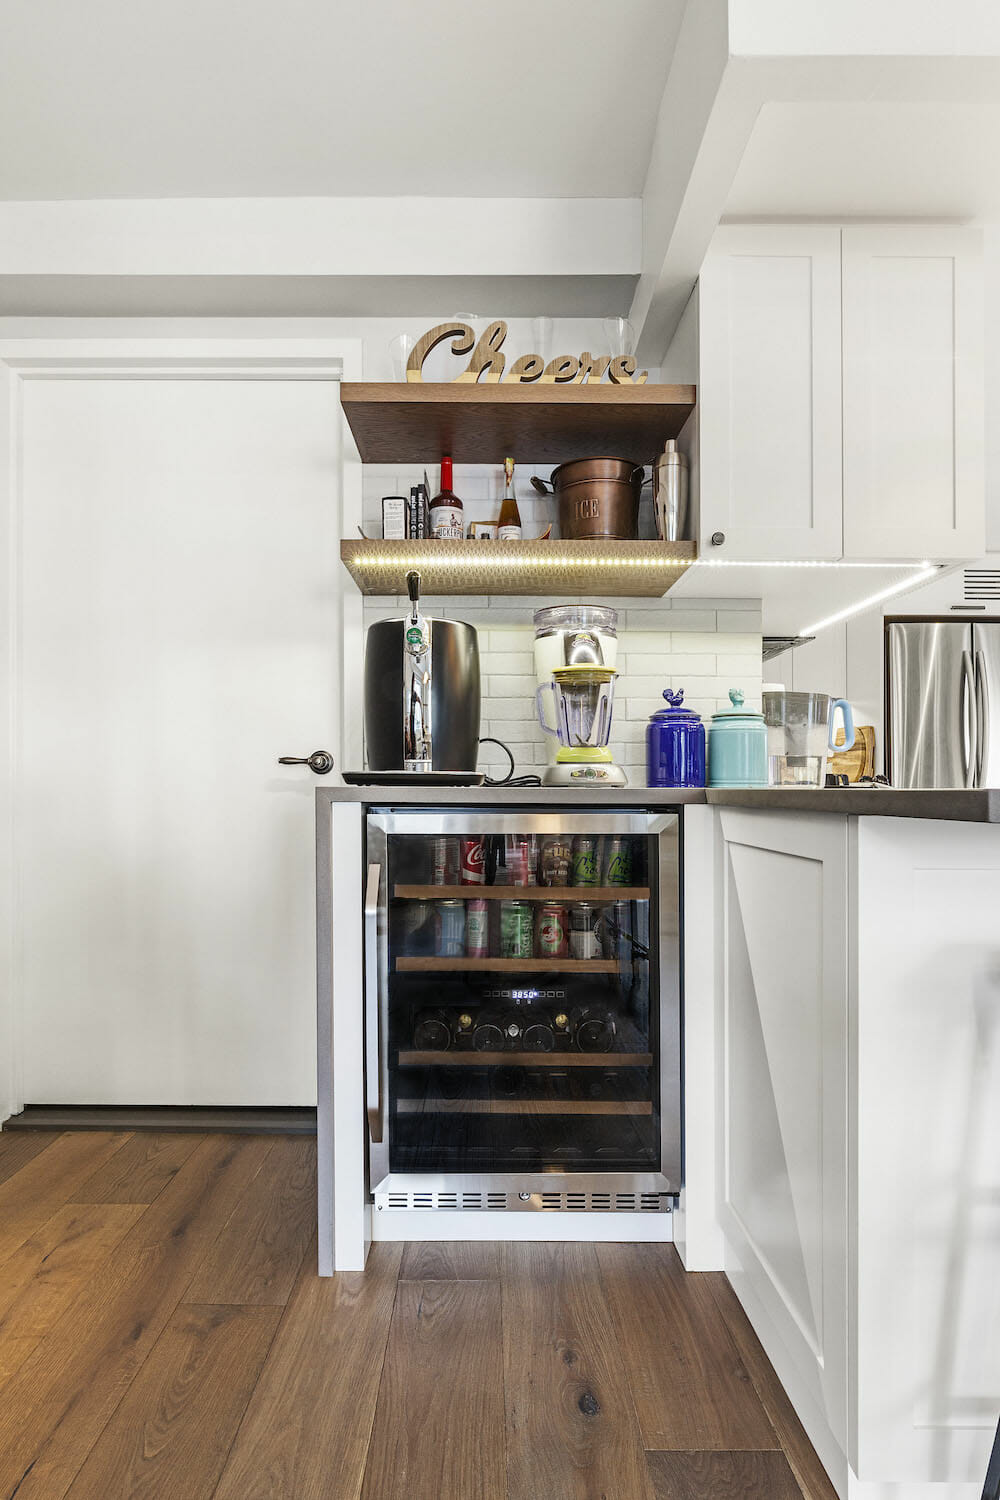 8 Ways To Add a Small Wine Fridge in the Kitchen